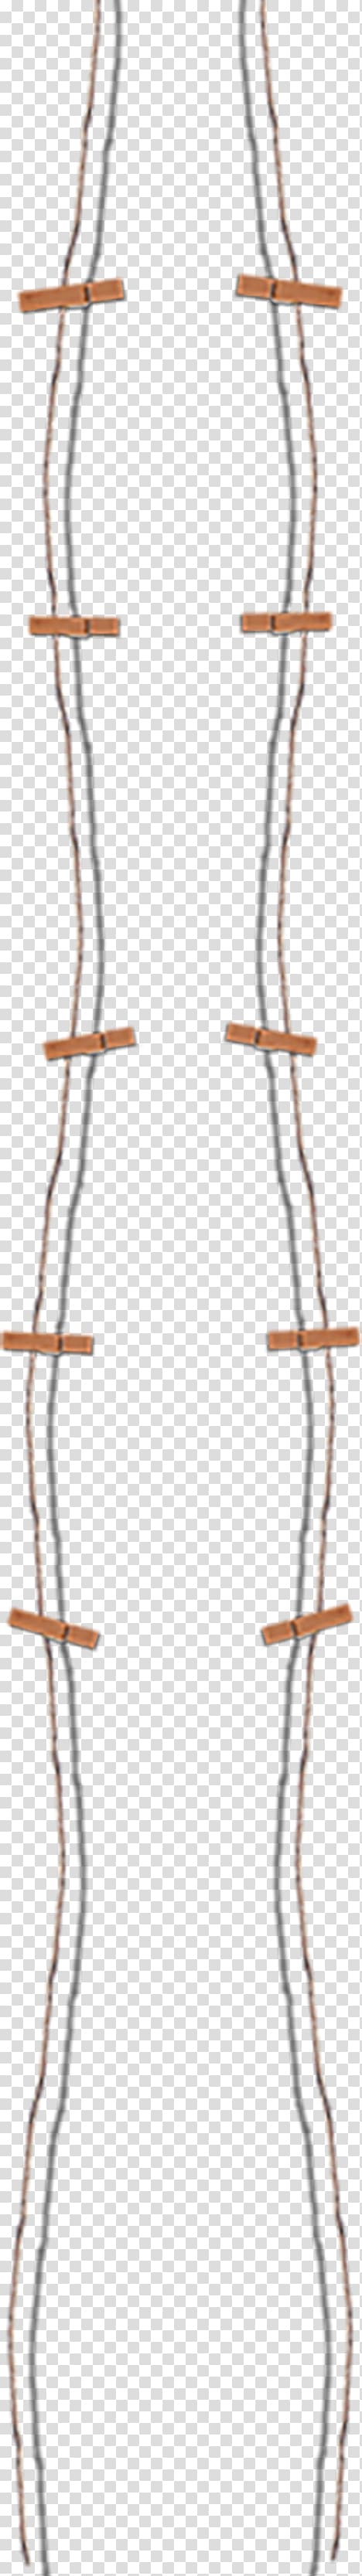 Rope Computer file, Rope sling wooden clamps creative transparent background PNG clipart